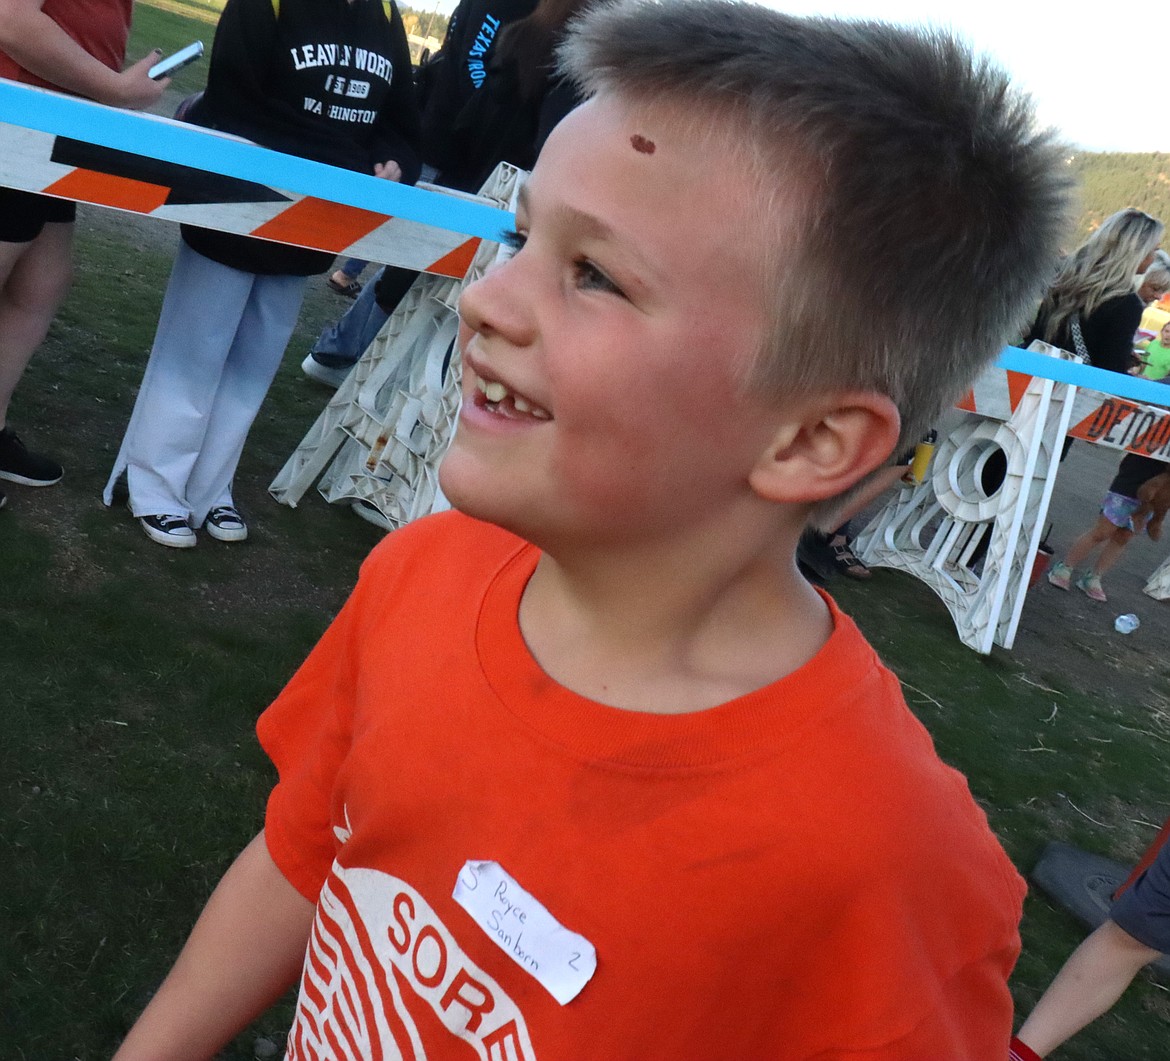 Second-grader Royce Sanborn smiles after finishing his one-mile race in the Coeur d'Alene School District's annual elementary school cross country meet at the Kootenai County Fairgrounds on Thursday.